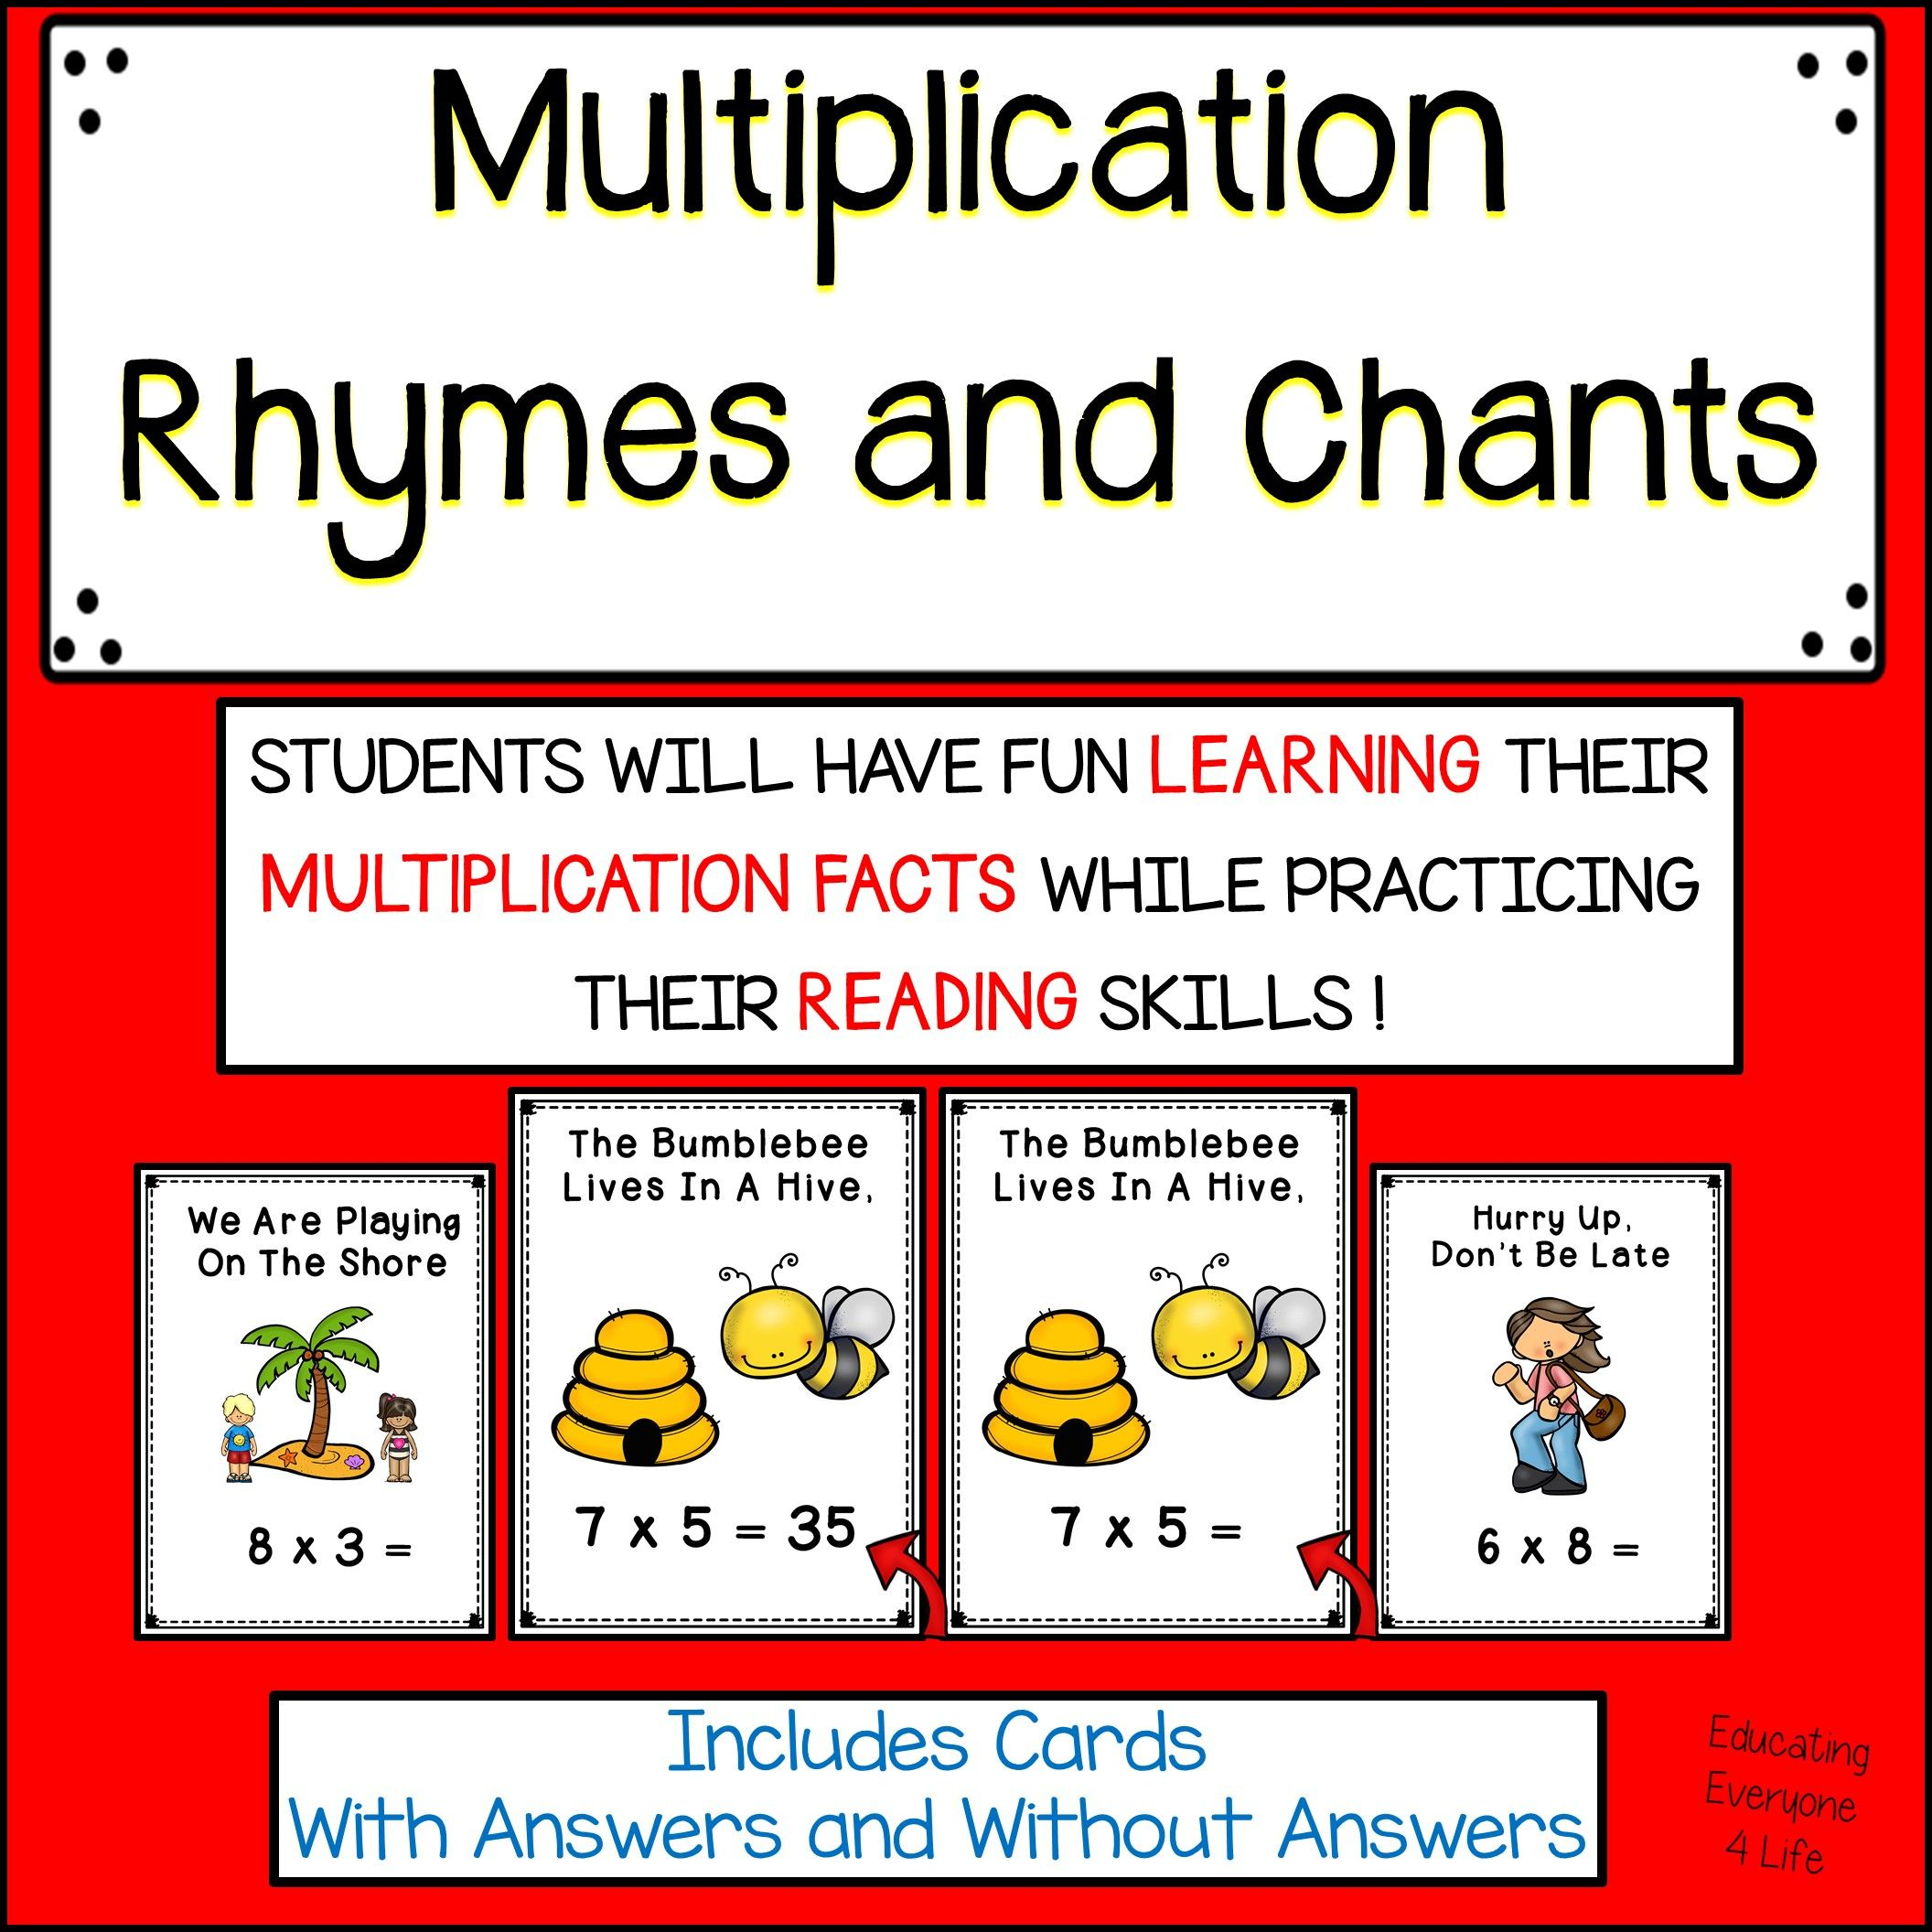 Multiplication Rhymes And Chants | Multiplication intended for Free Printable Multiplication Rhymes